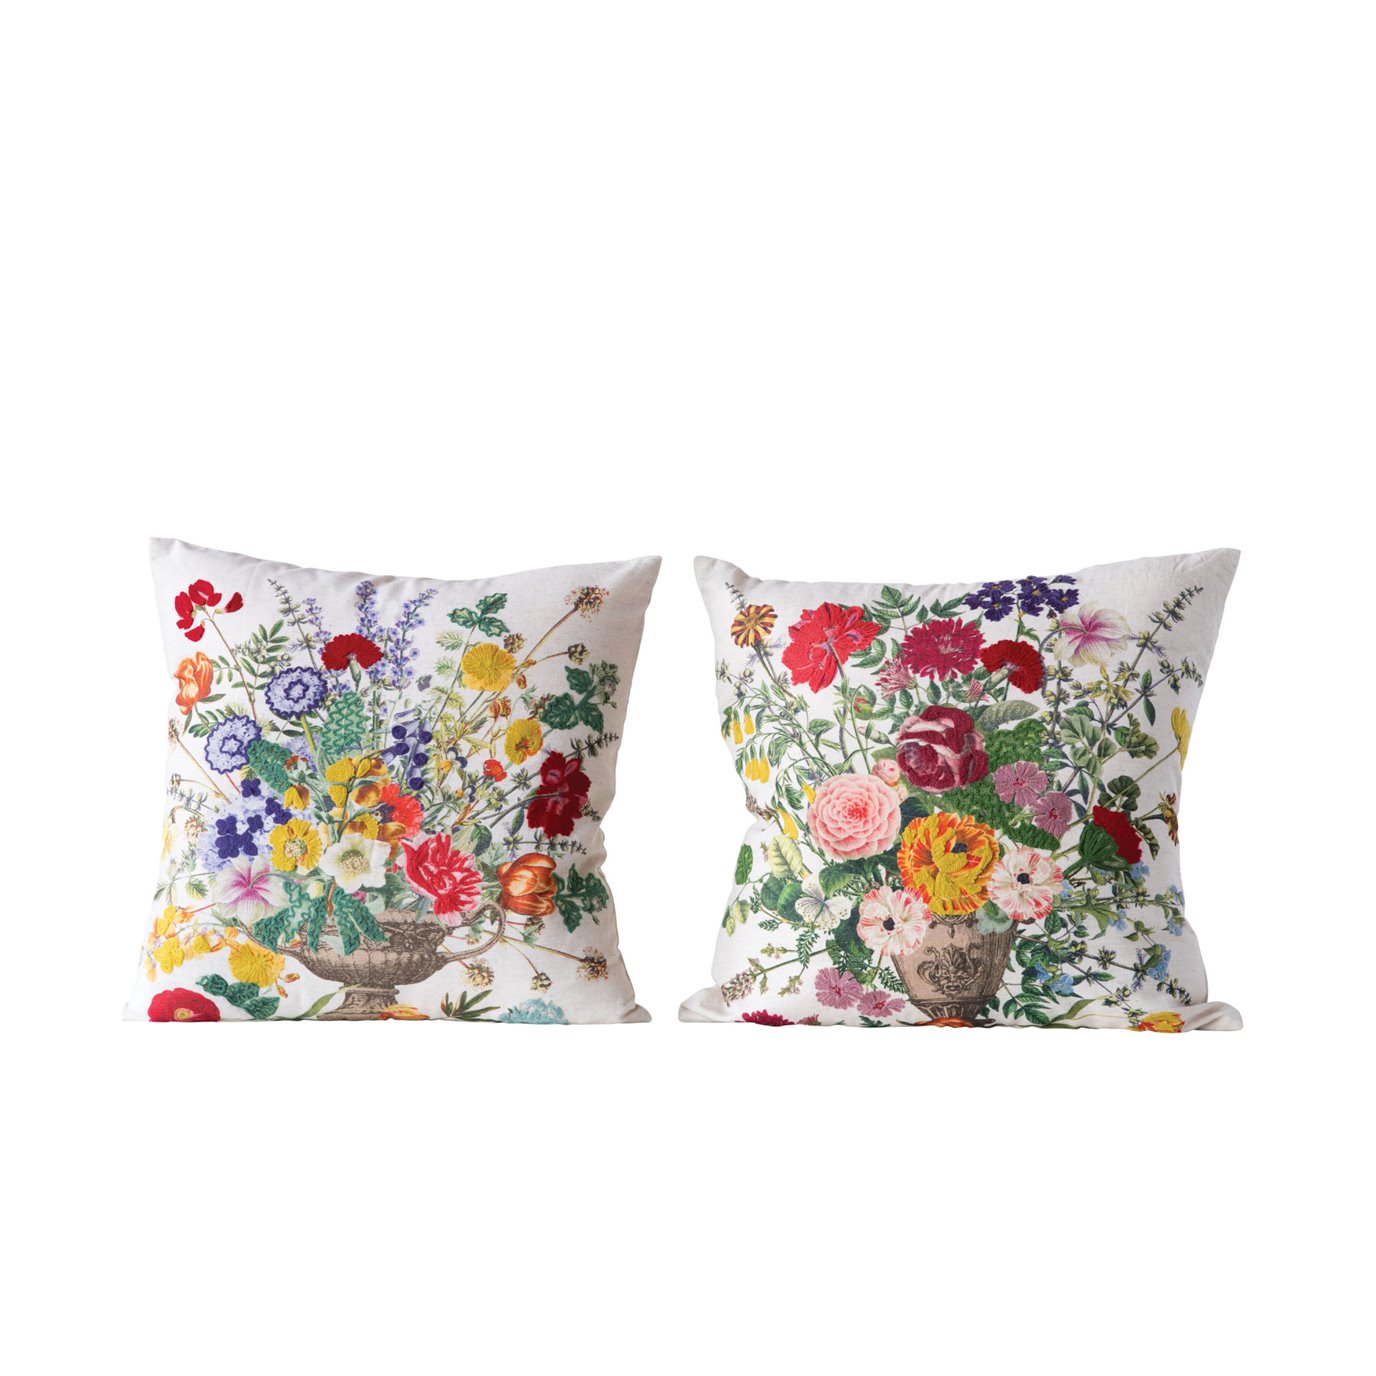 Square Cotton Blend Pillow with Embroidered Flowers (2 styles)